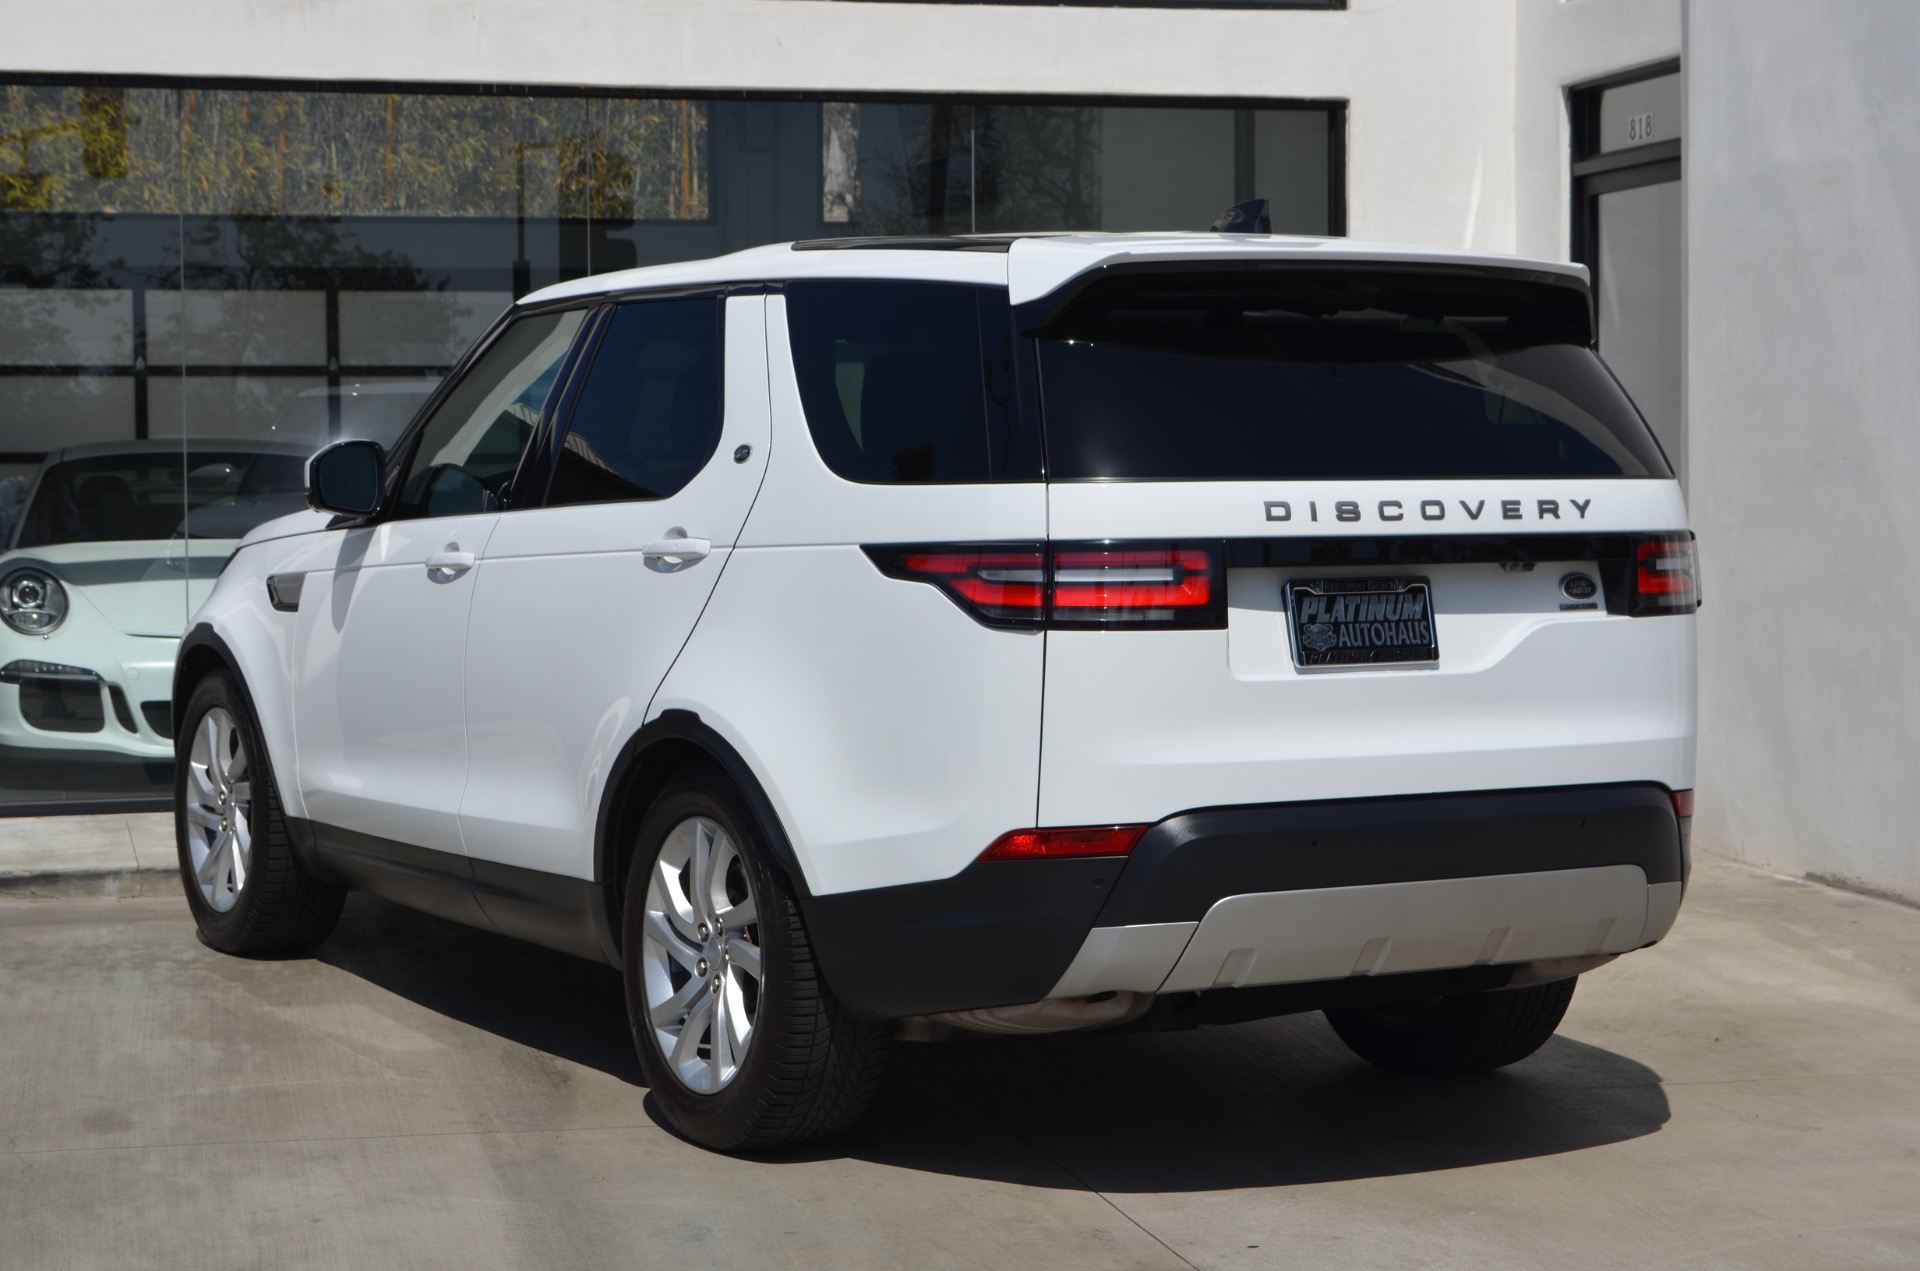 2017 Land Rover Discovery Hse Stock 7360 For Sale Near Redondo Beach